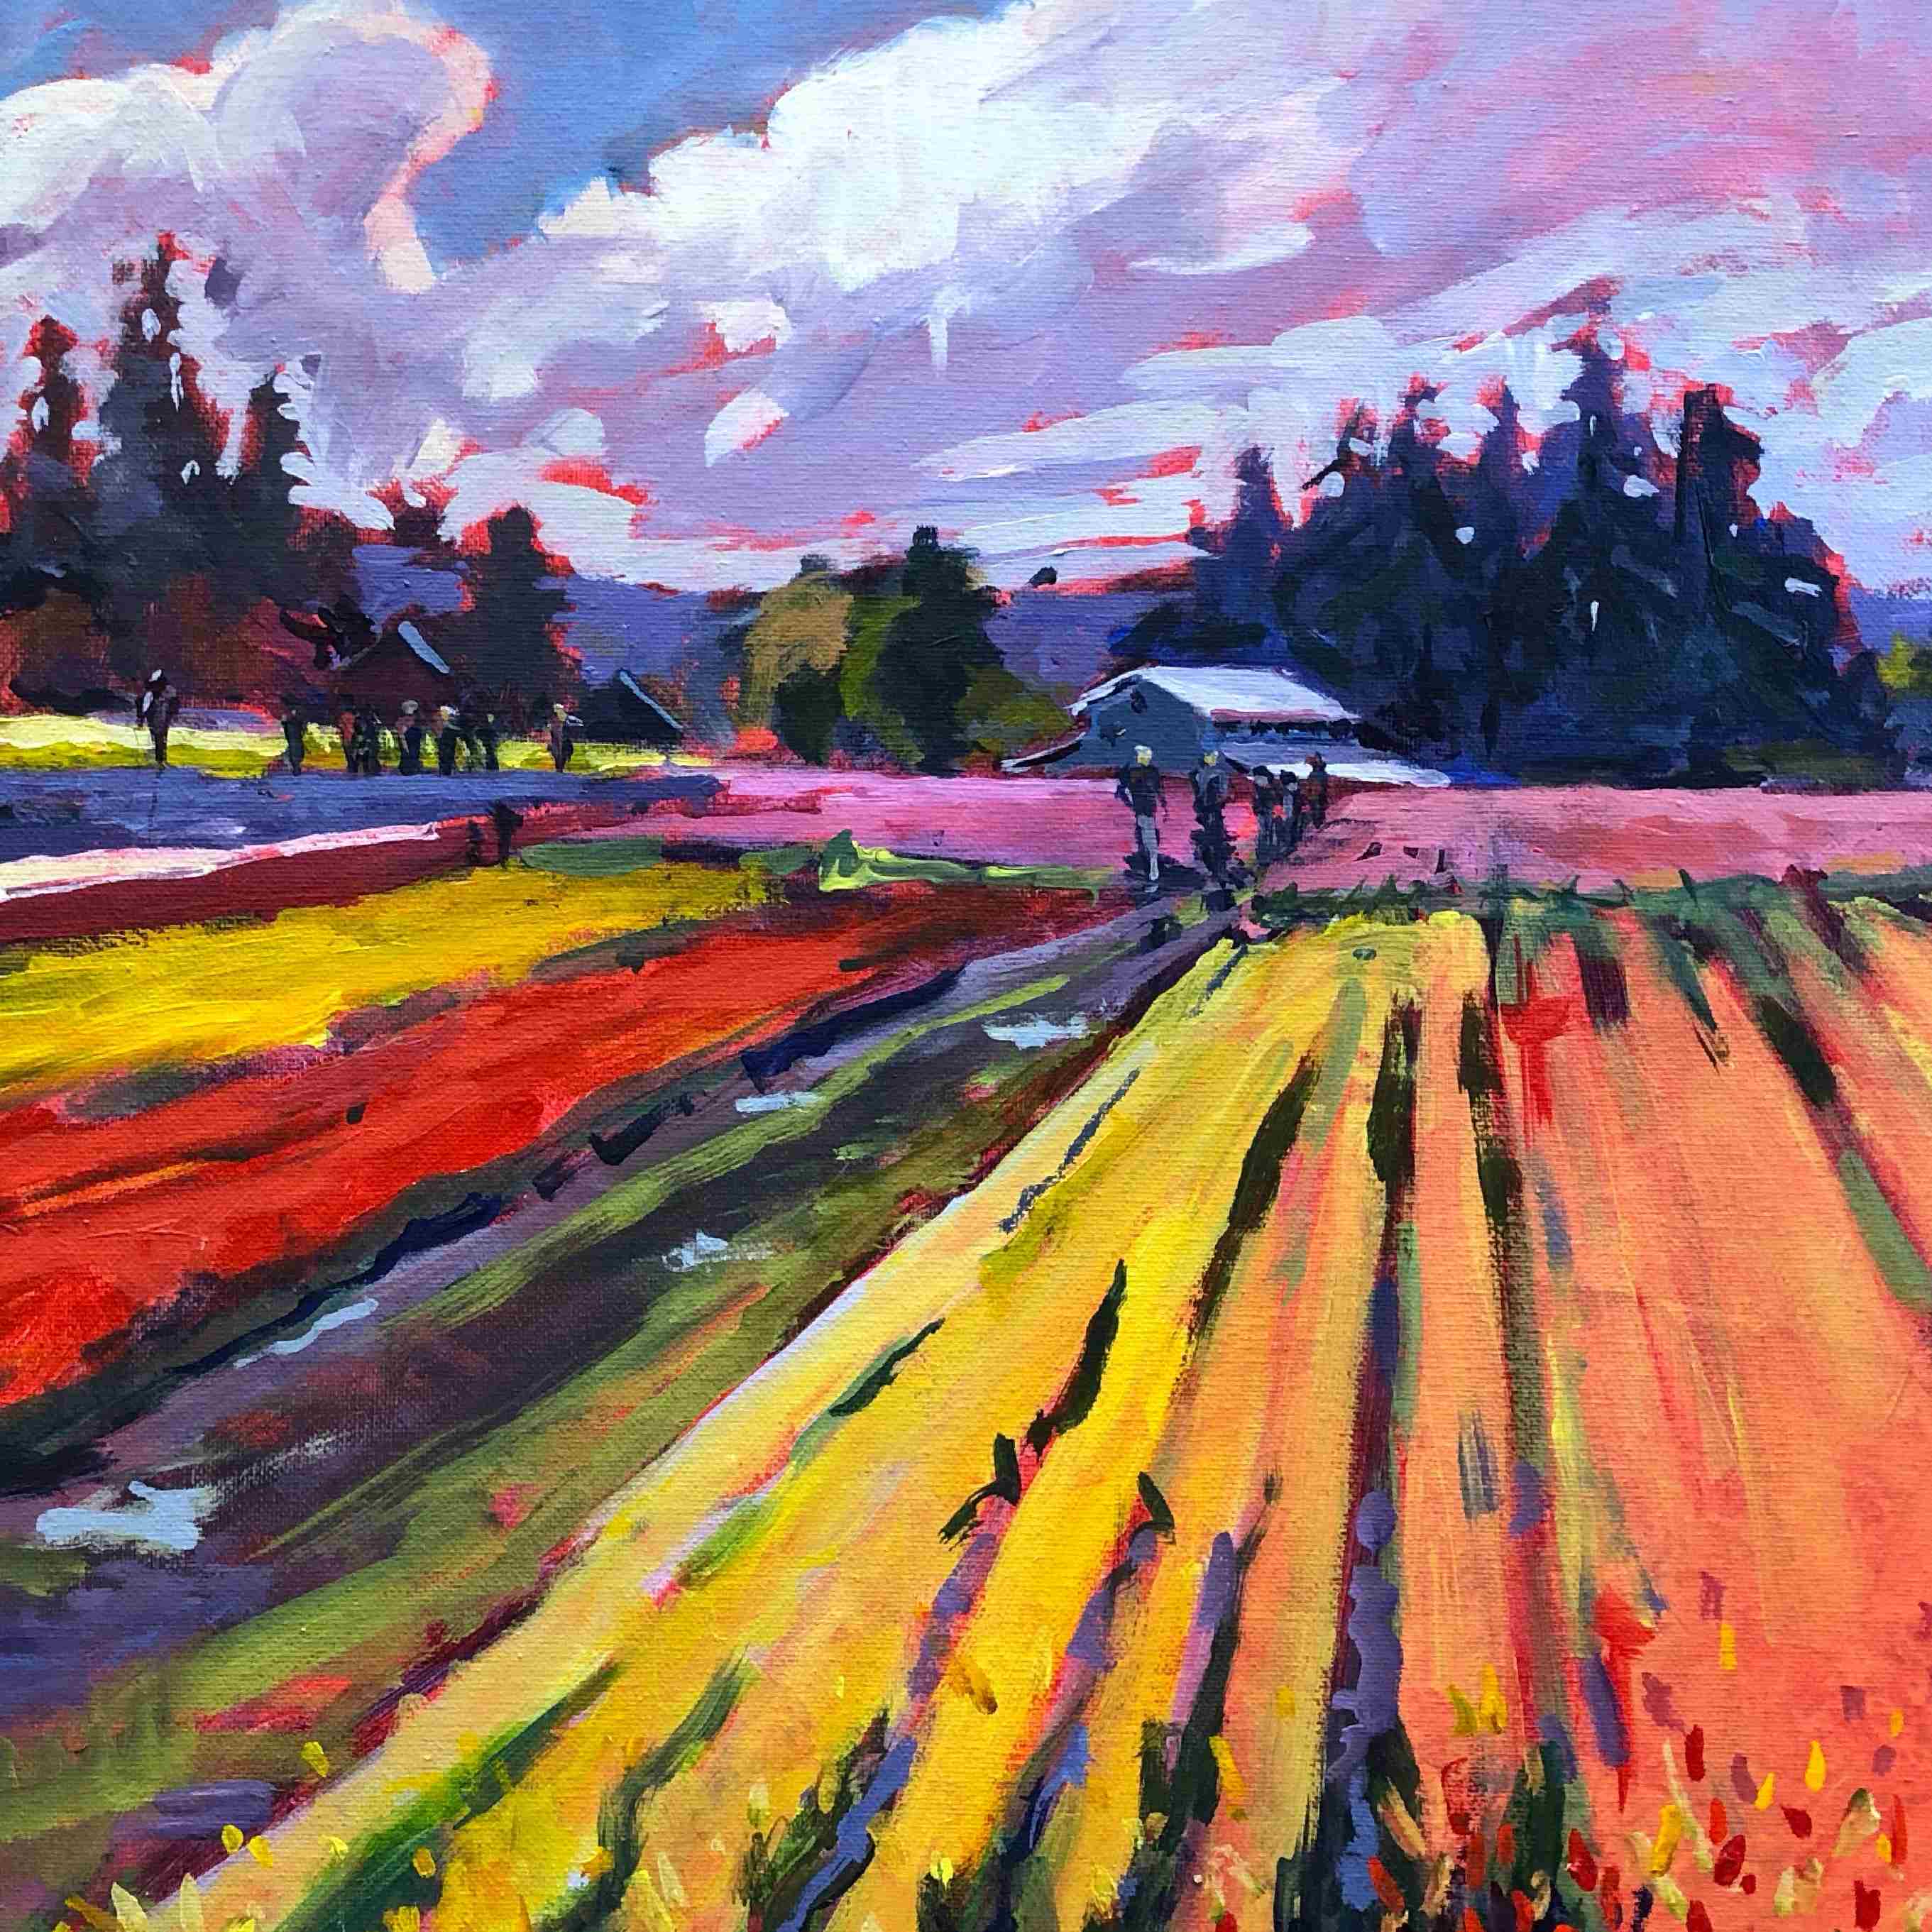 brightly colored painting of farm with colorful rows of vegetation.